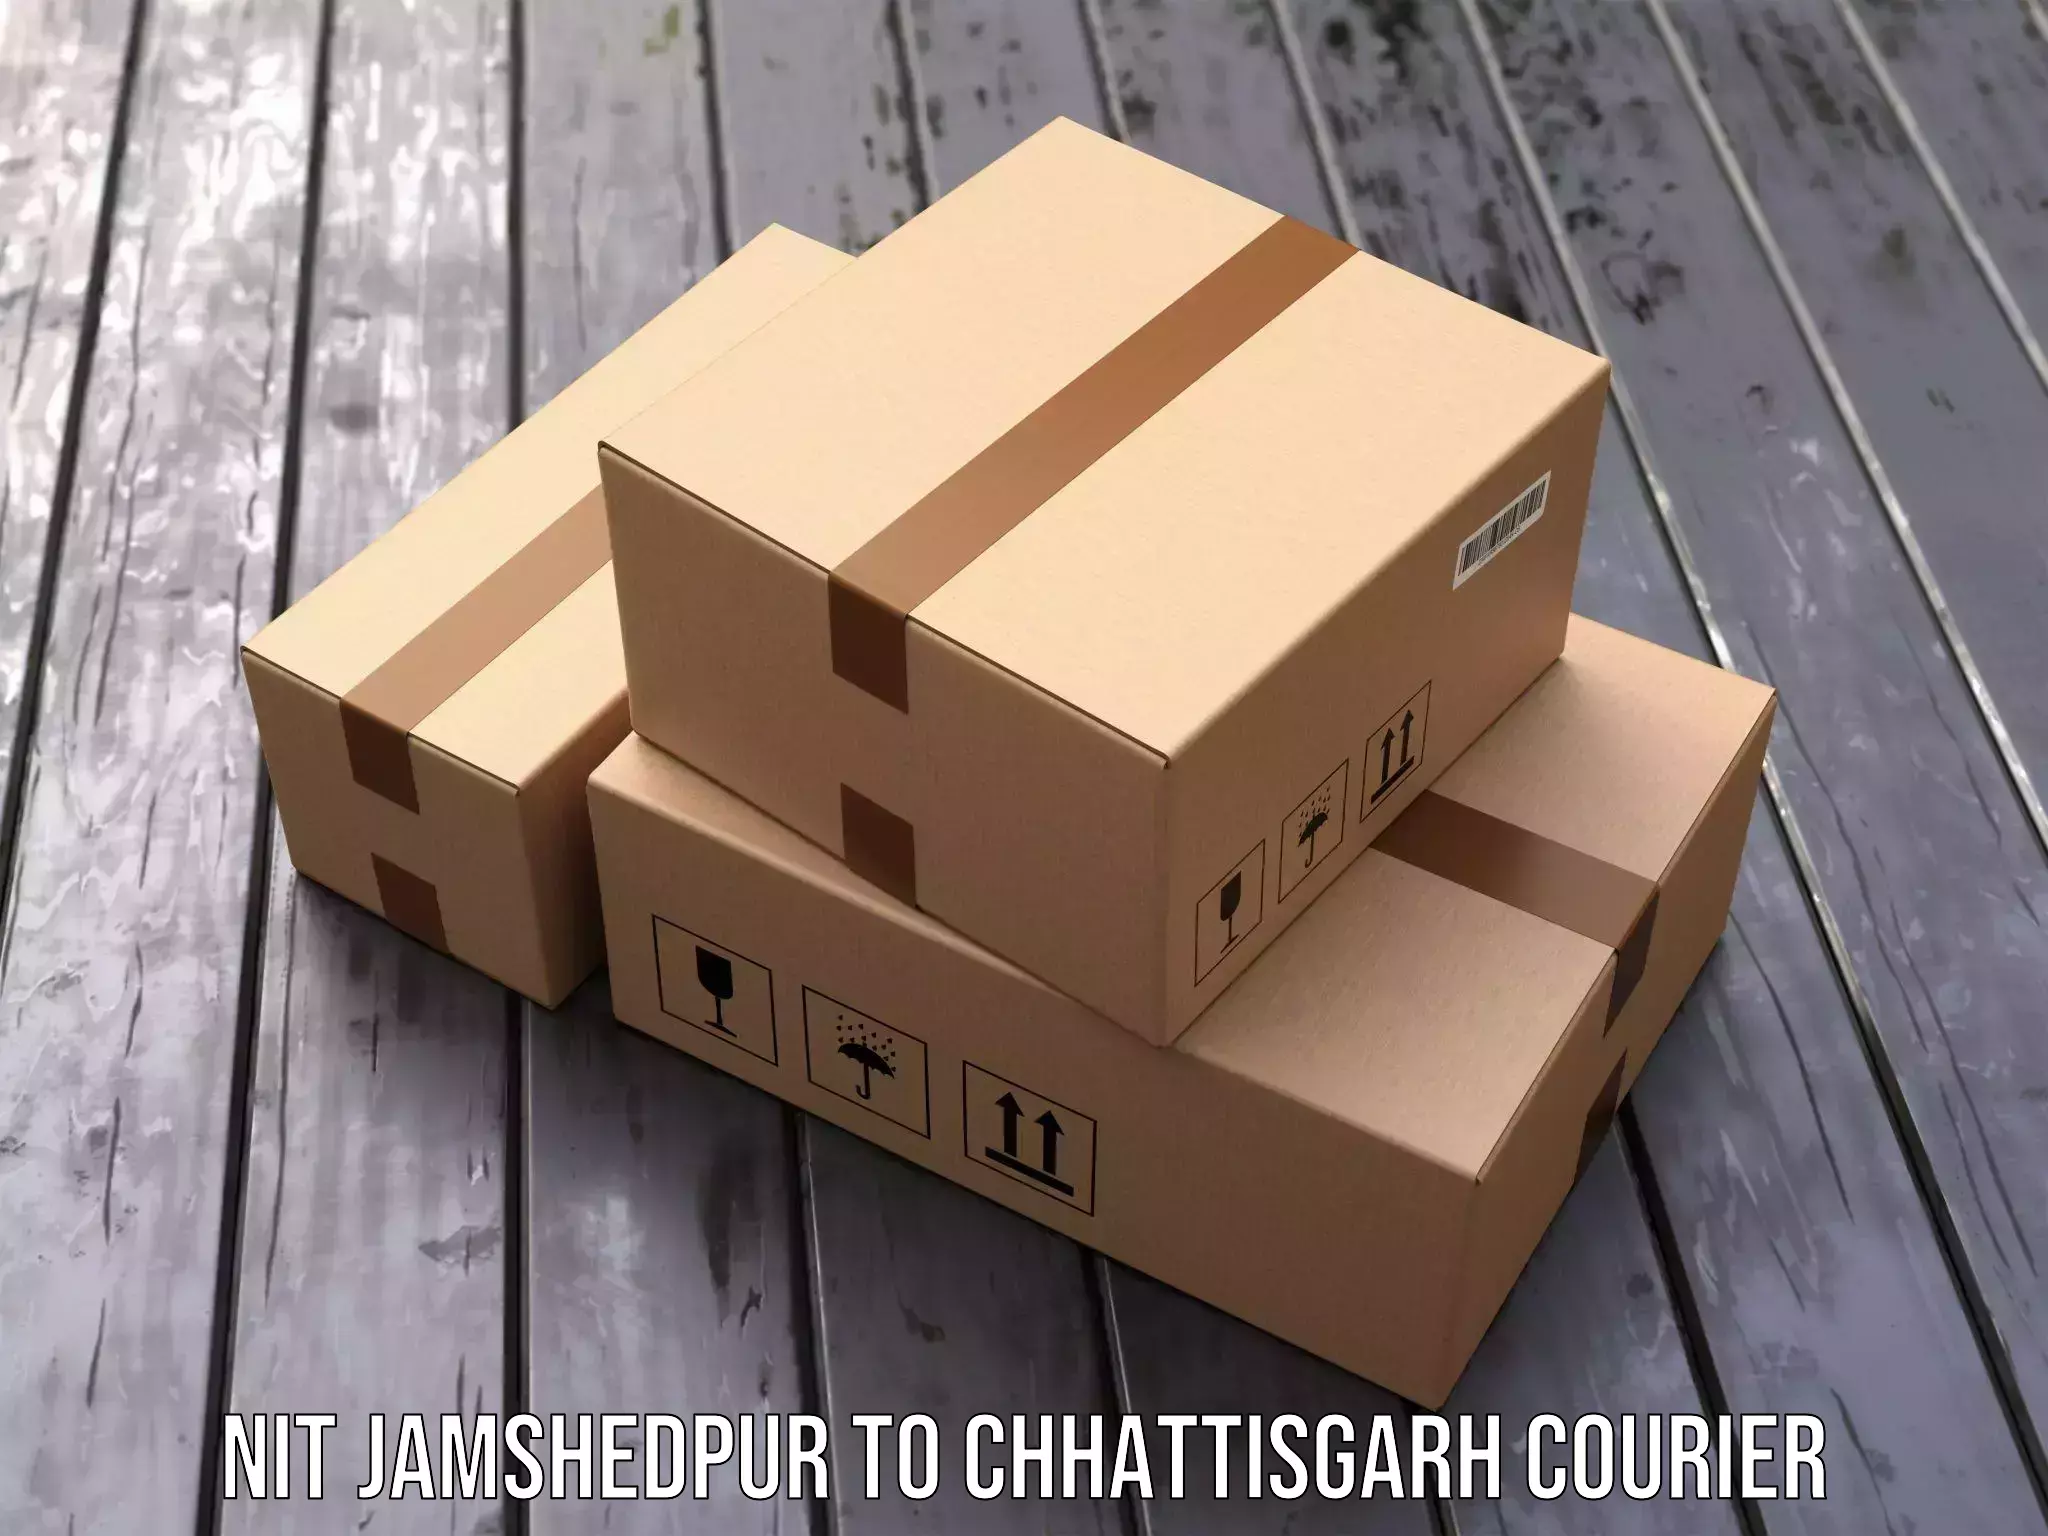 Multi-national courier services NIT Jamshedpur to Chhattisgarh